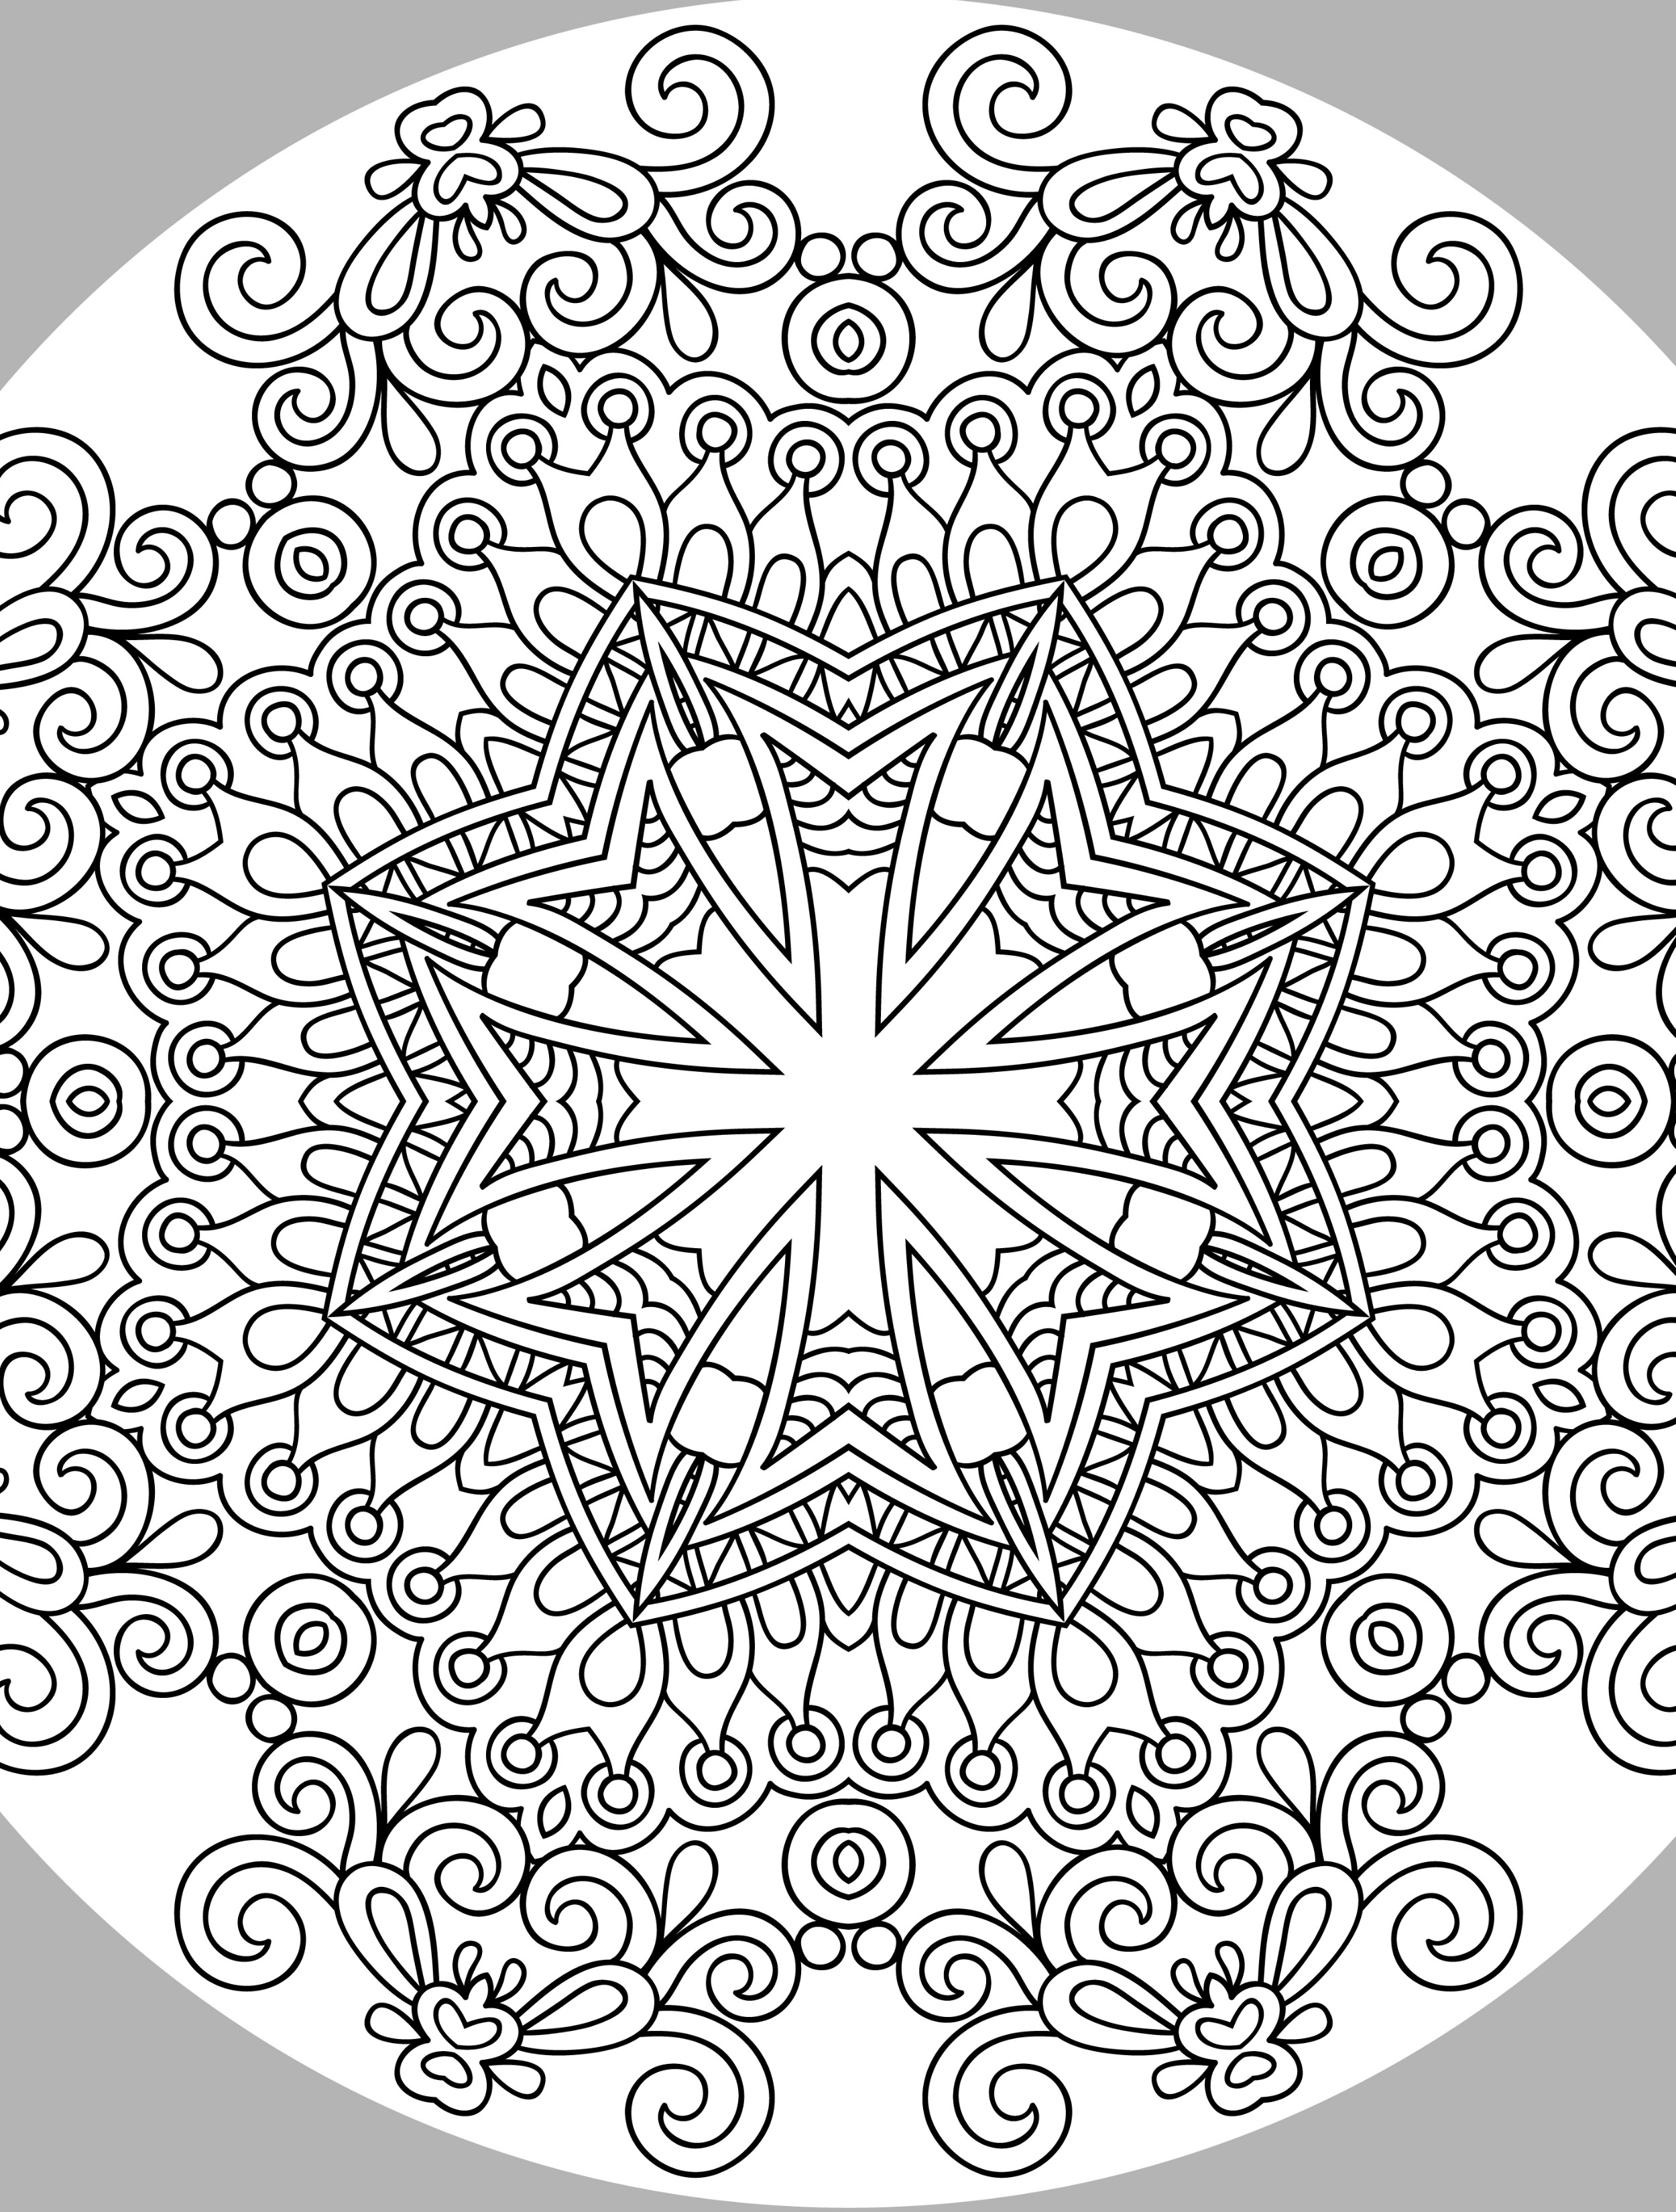 55+ Adult Coloring Pages Finished to Perfection - #7 is Stunning 157